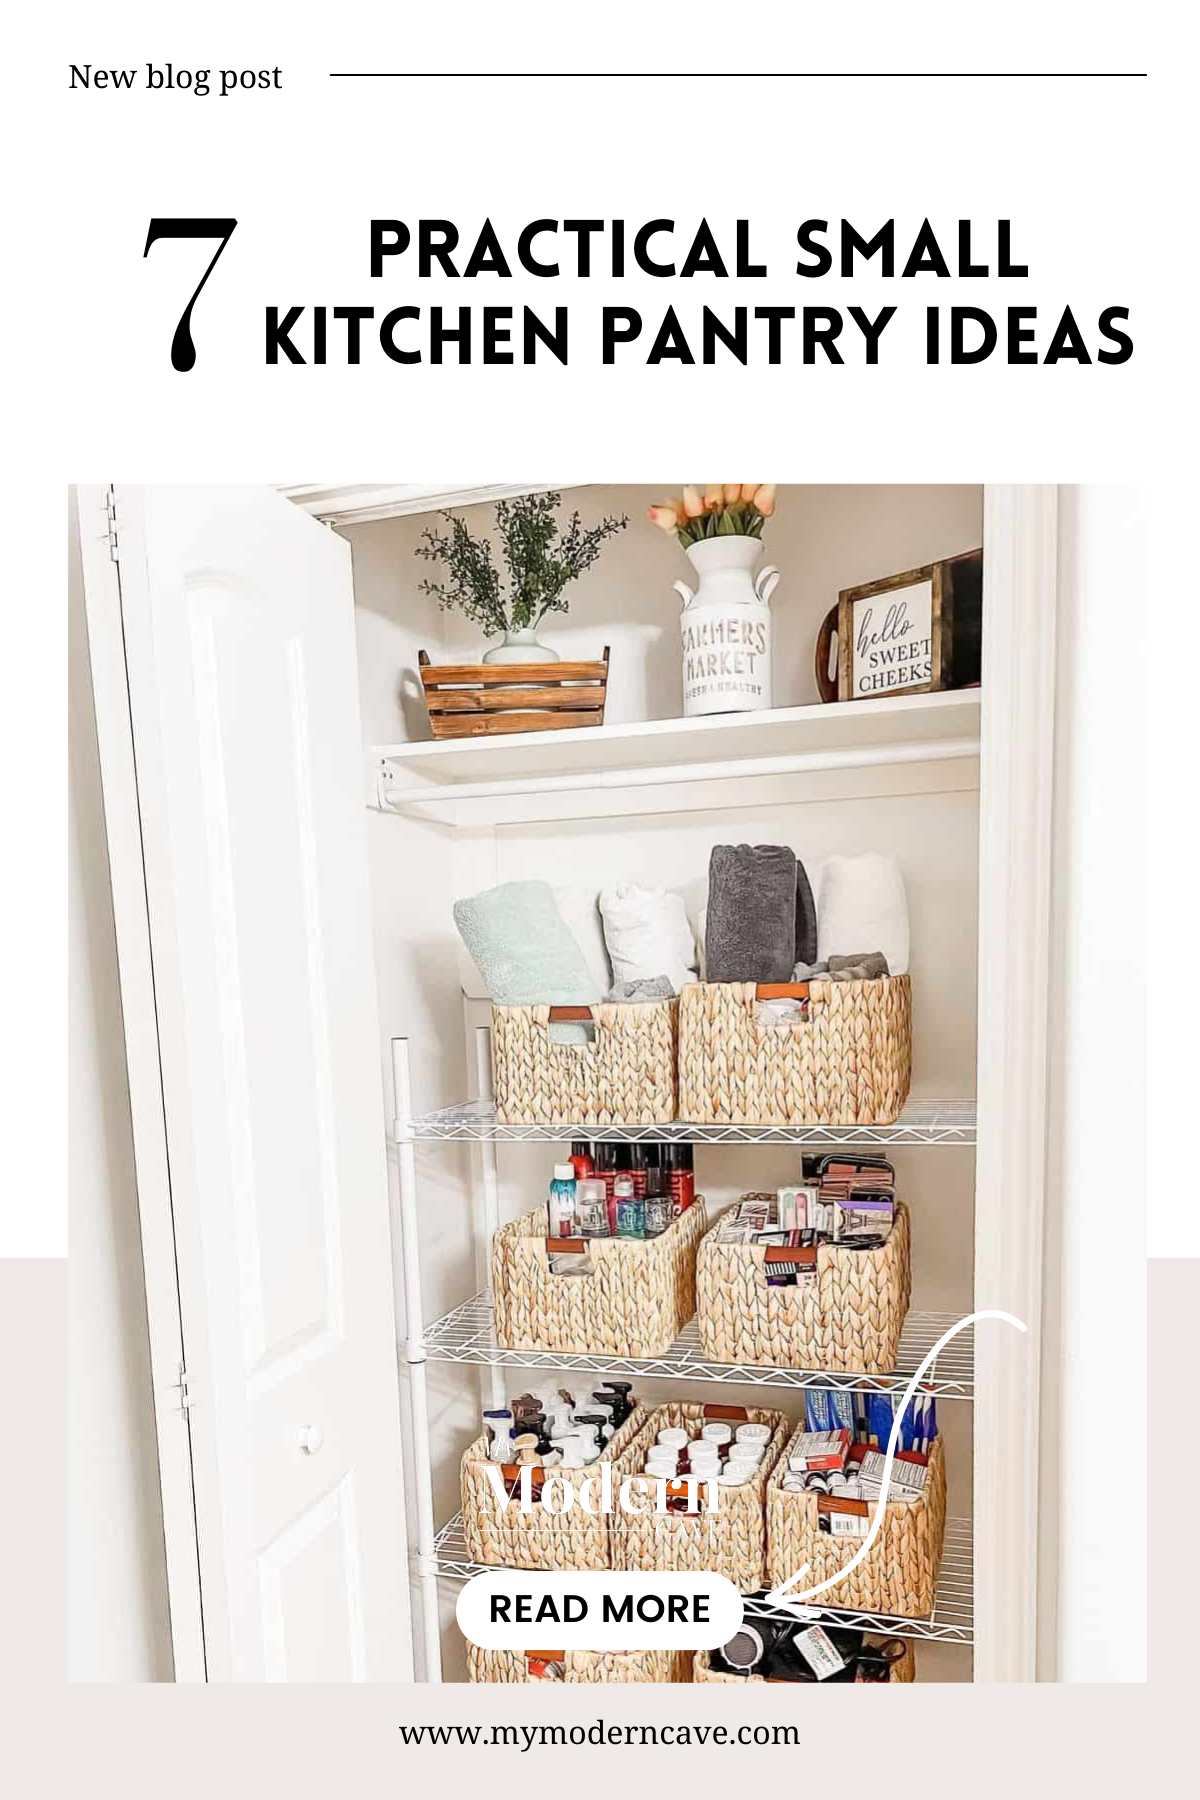 Small Kitchen Pantry Ideas Infographic